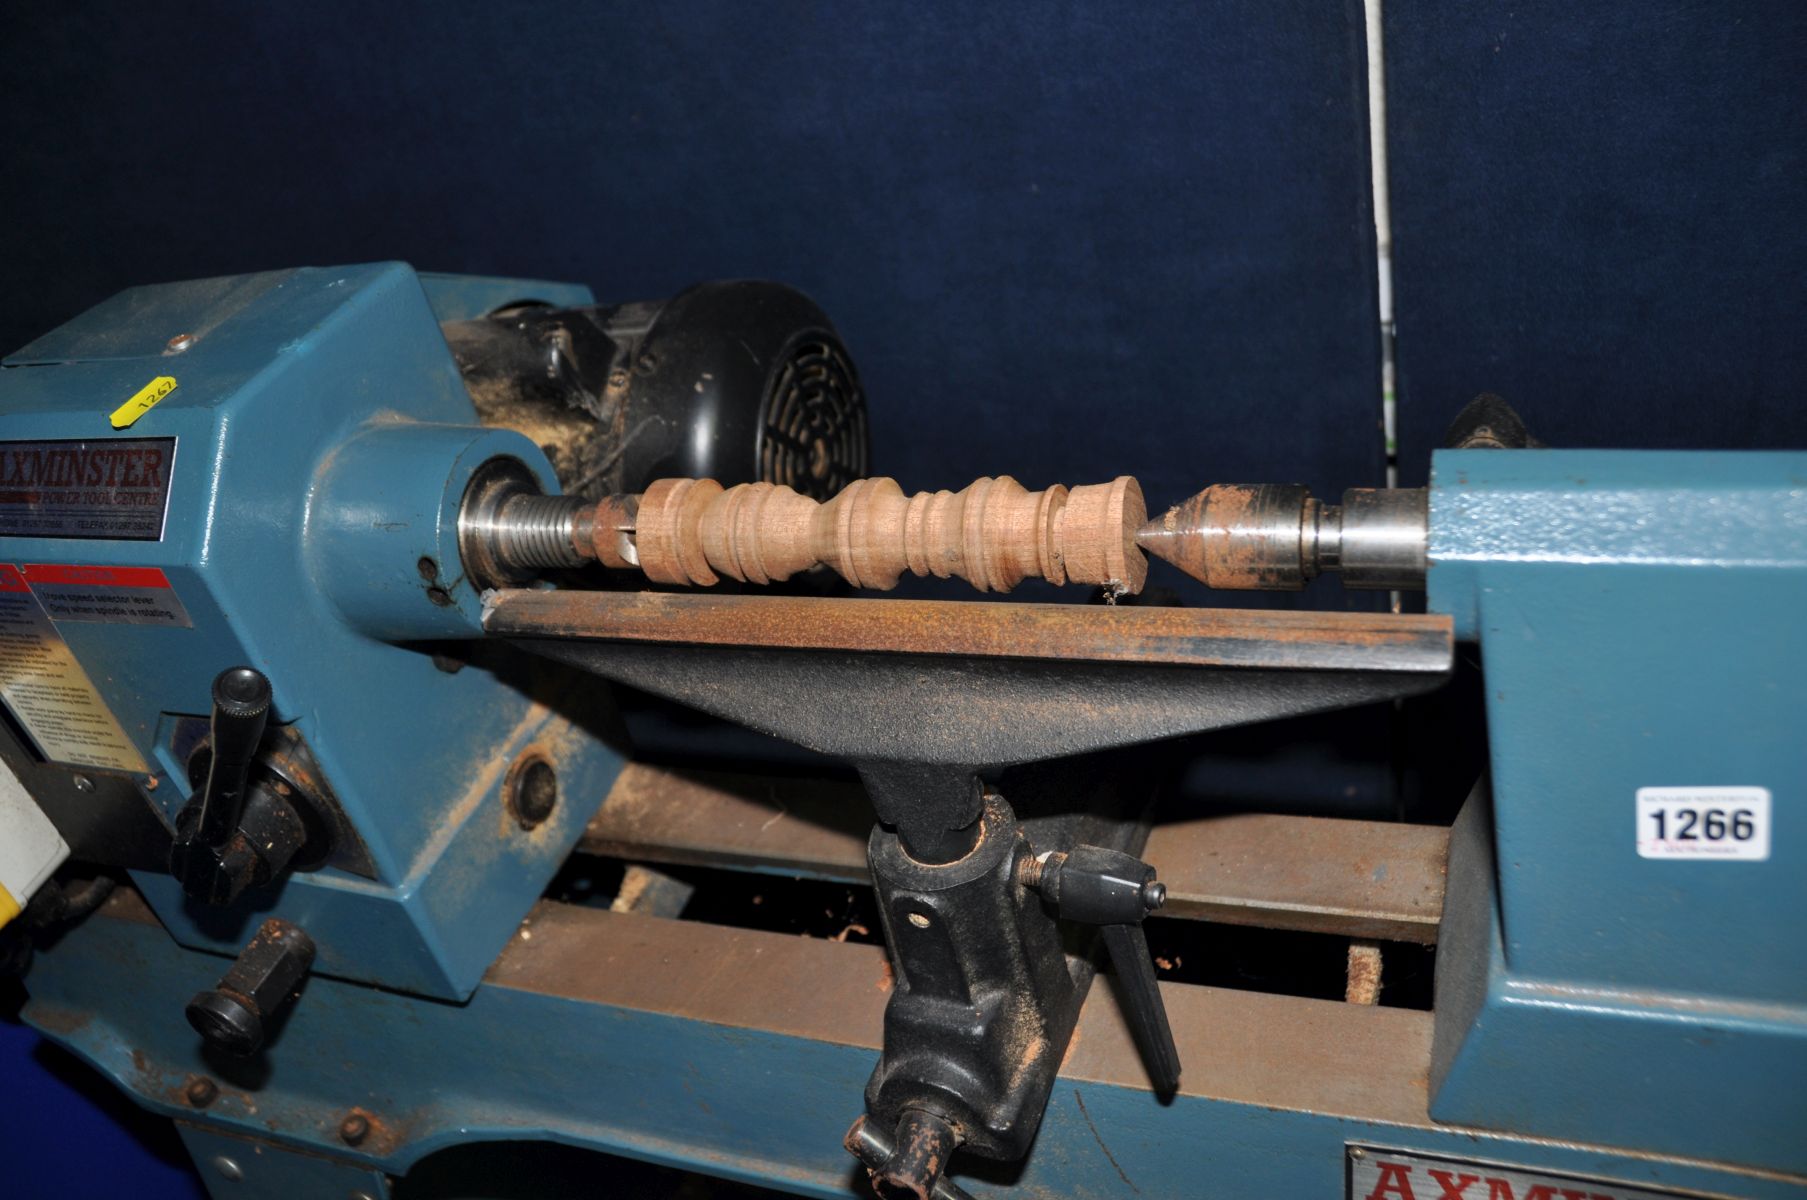 AN AXMINSTER APTC M950 WOODTURNING LATHE on stand, with three rests, a rest extension and a tray - Image 4 of 5